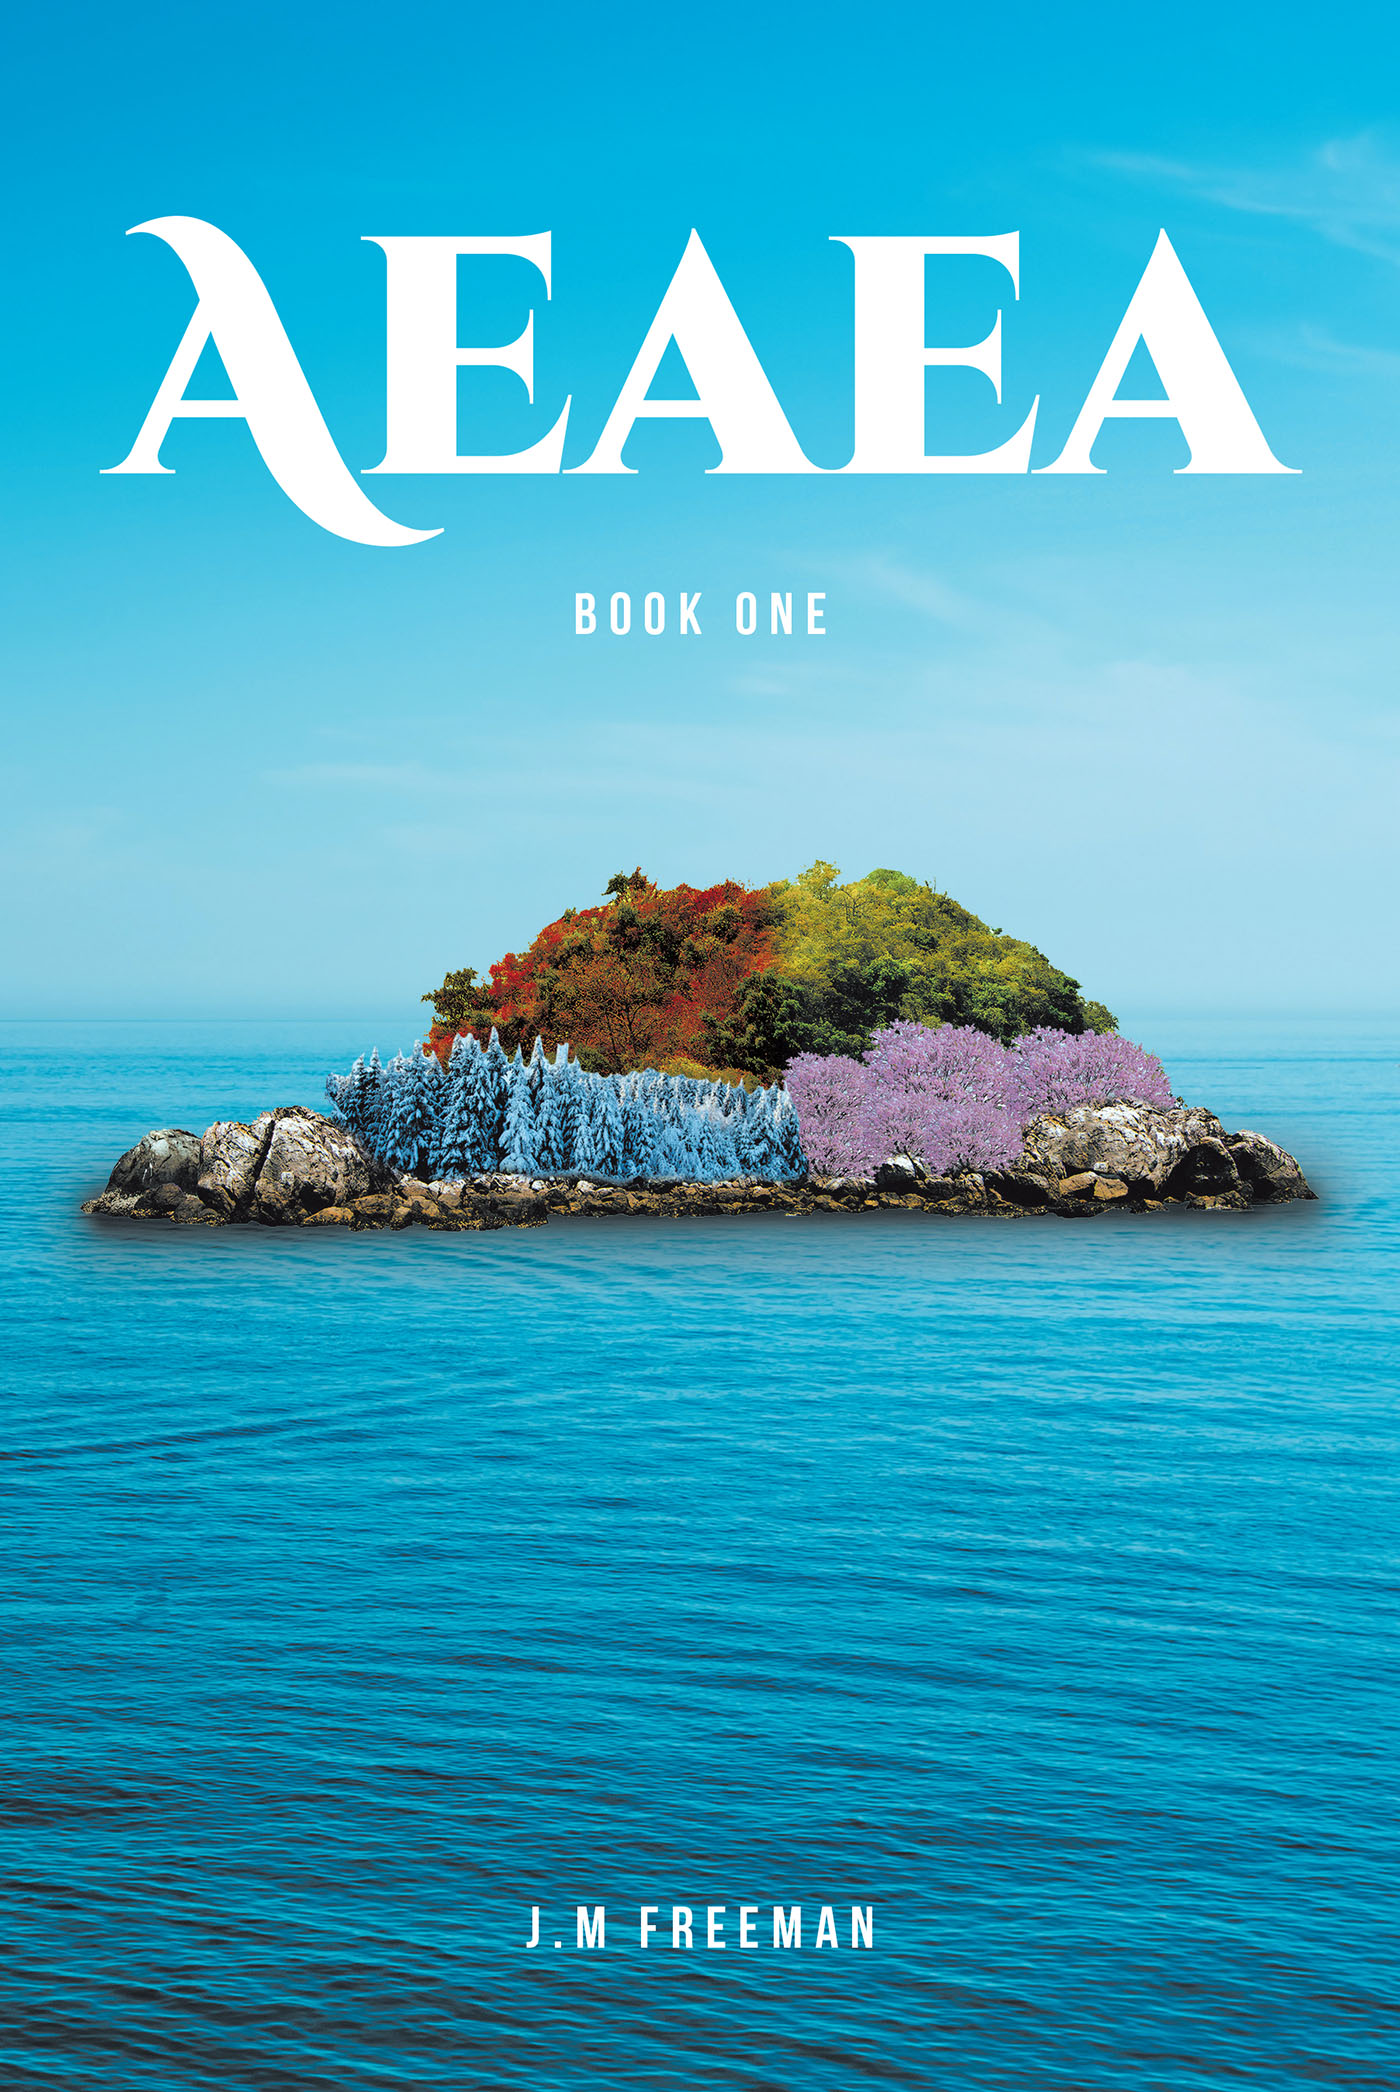 J.M Freeman’s New Book, “Aeaea: Book One,” is an Exhilarating Adventure Novel About the Consequences a Young Woman Faces When She Boldly Dares to Question Her Reality